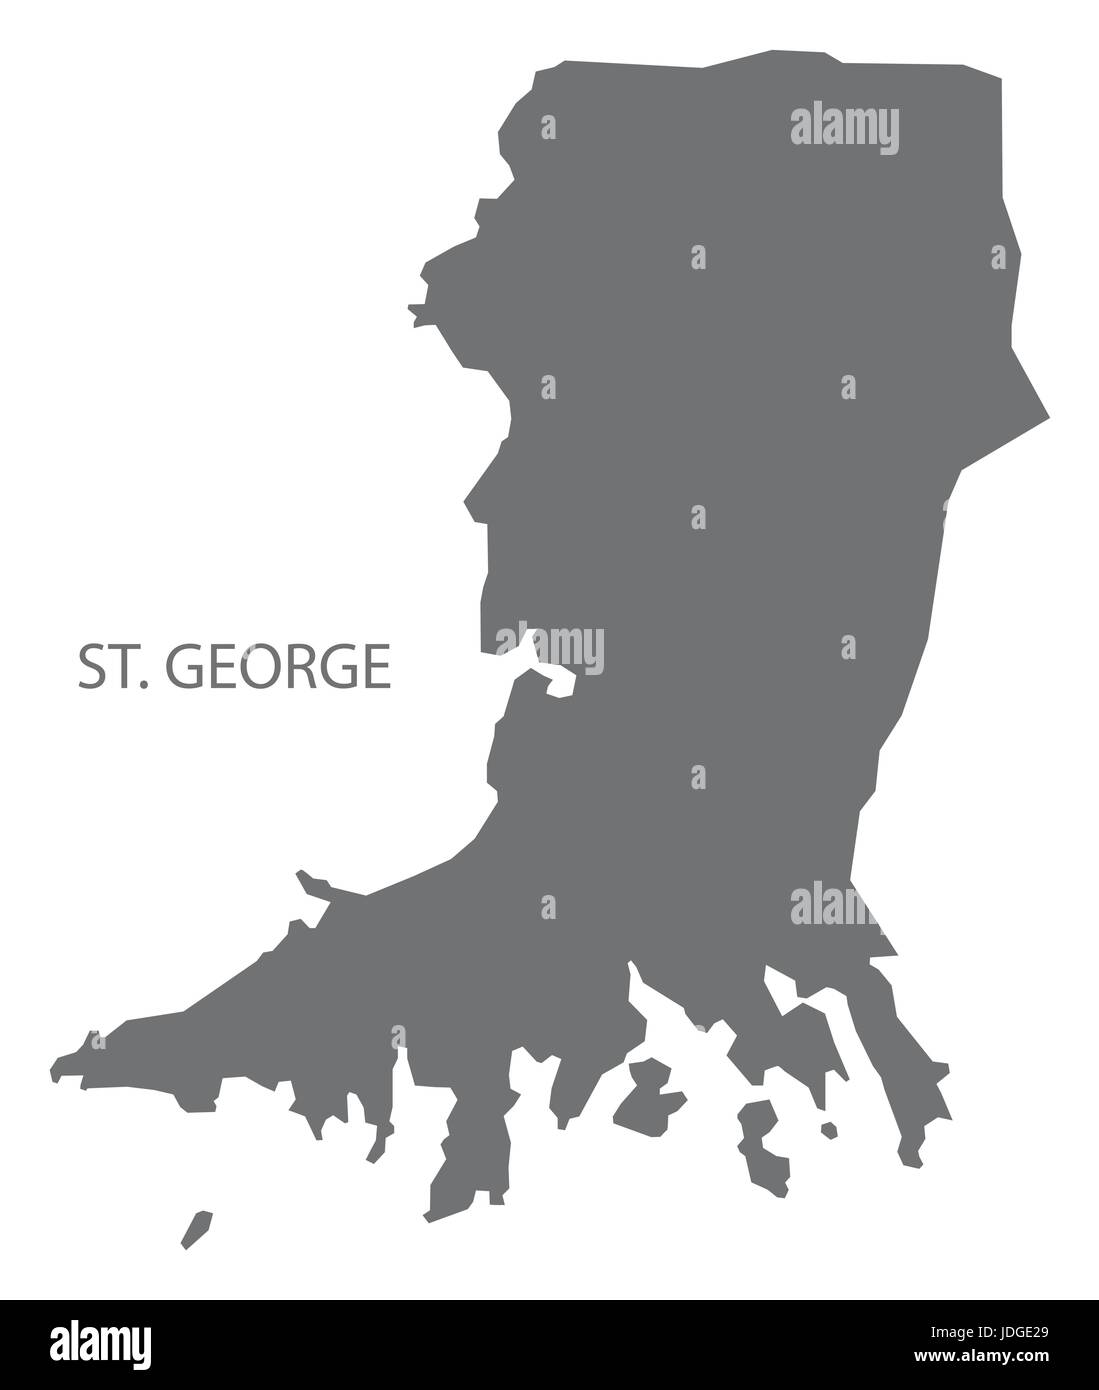 St. George map grey illustration silhouette Stock Vector